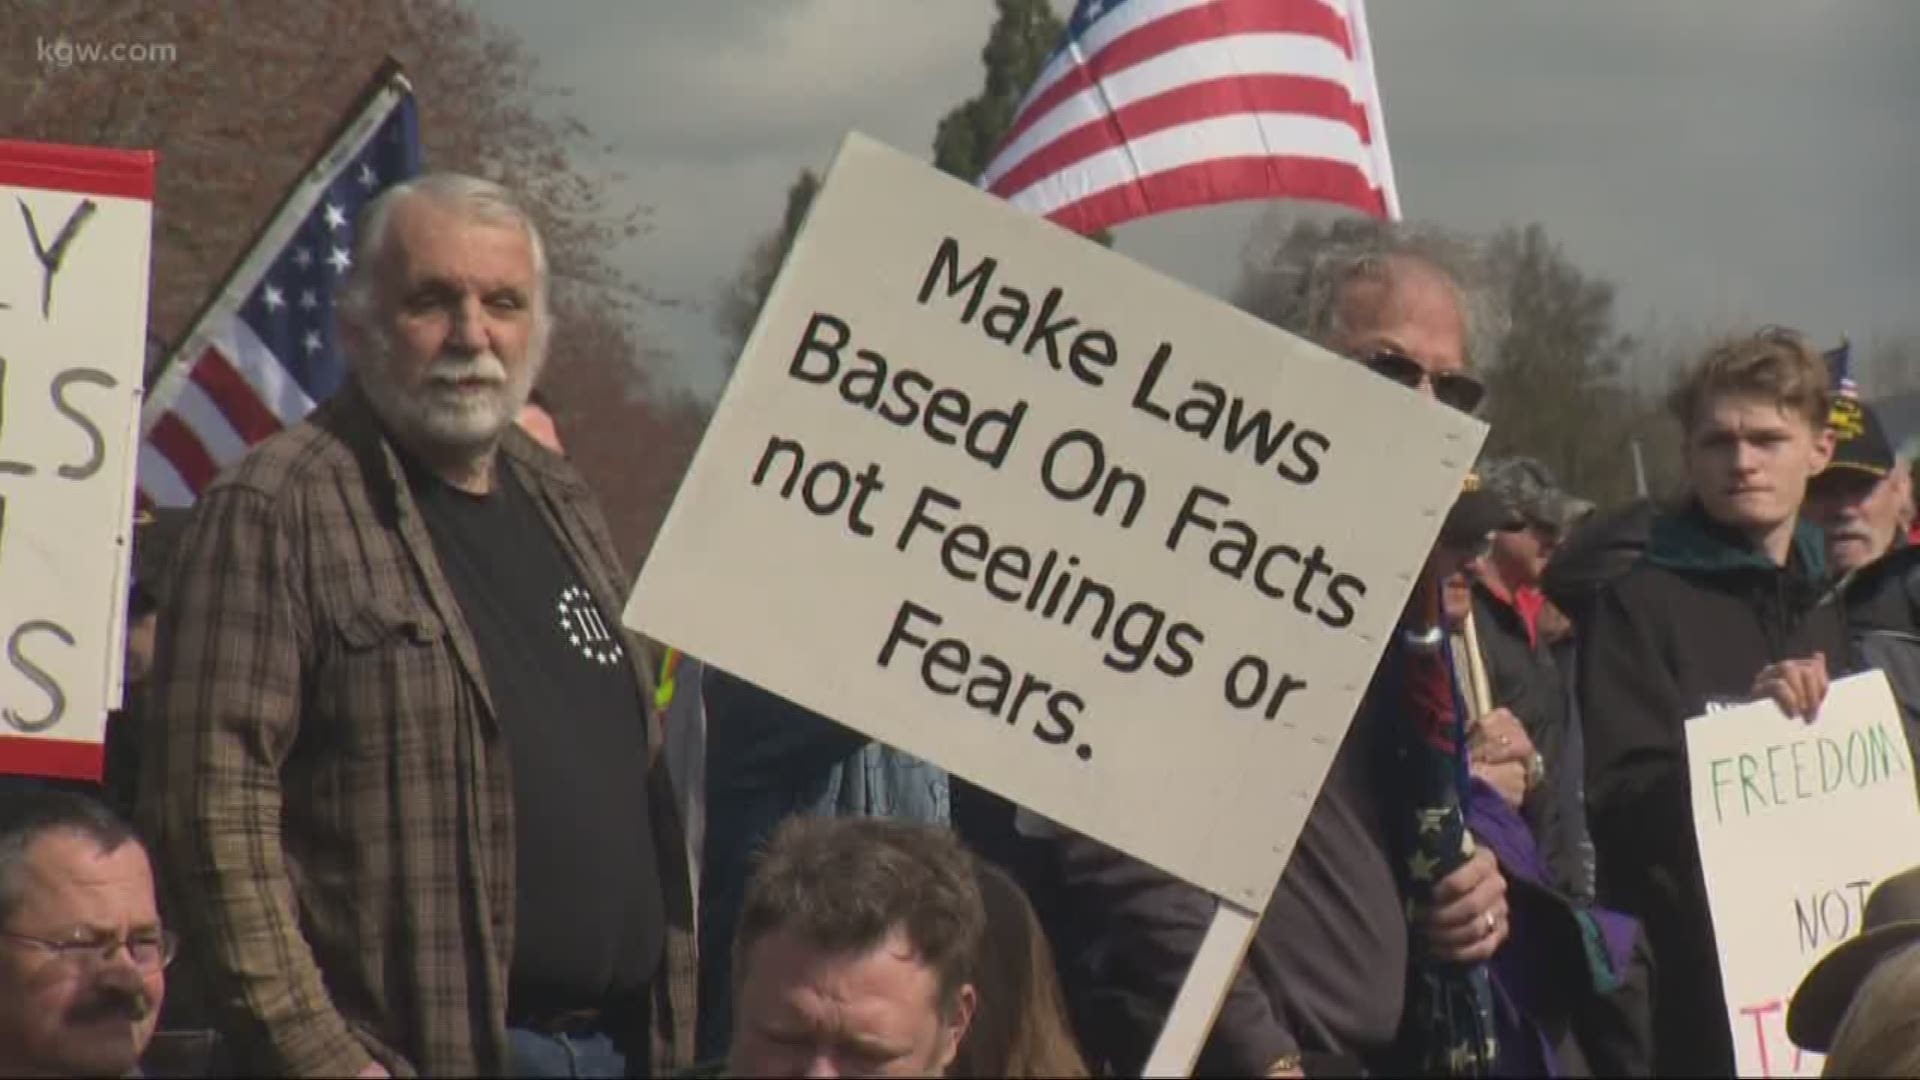 Saturday's rally was in response to a number of bills in the state legislature aimed at adding new regulations for gun owners.